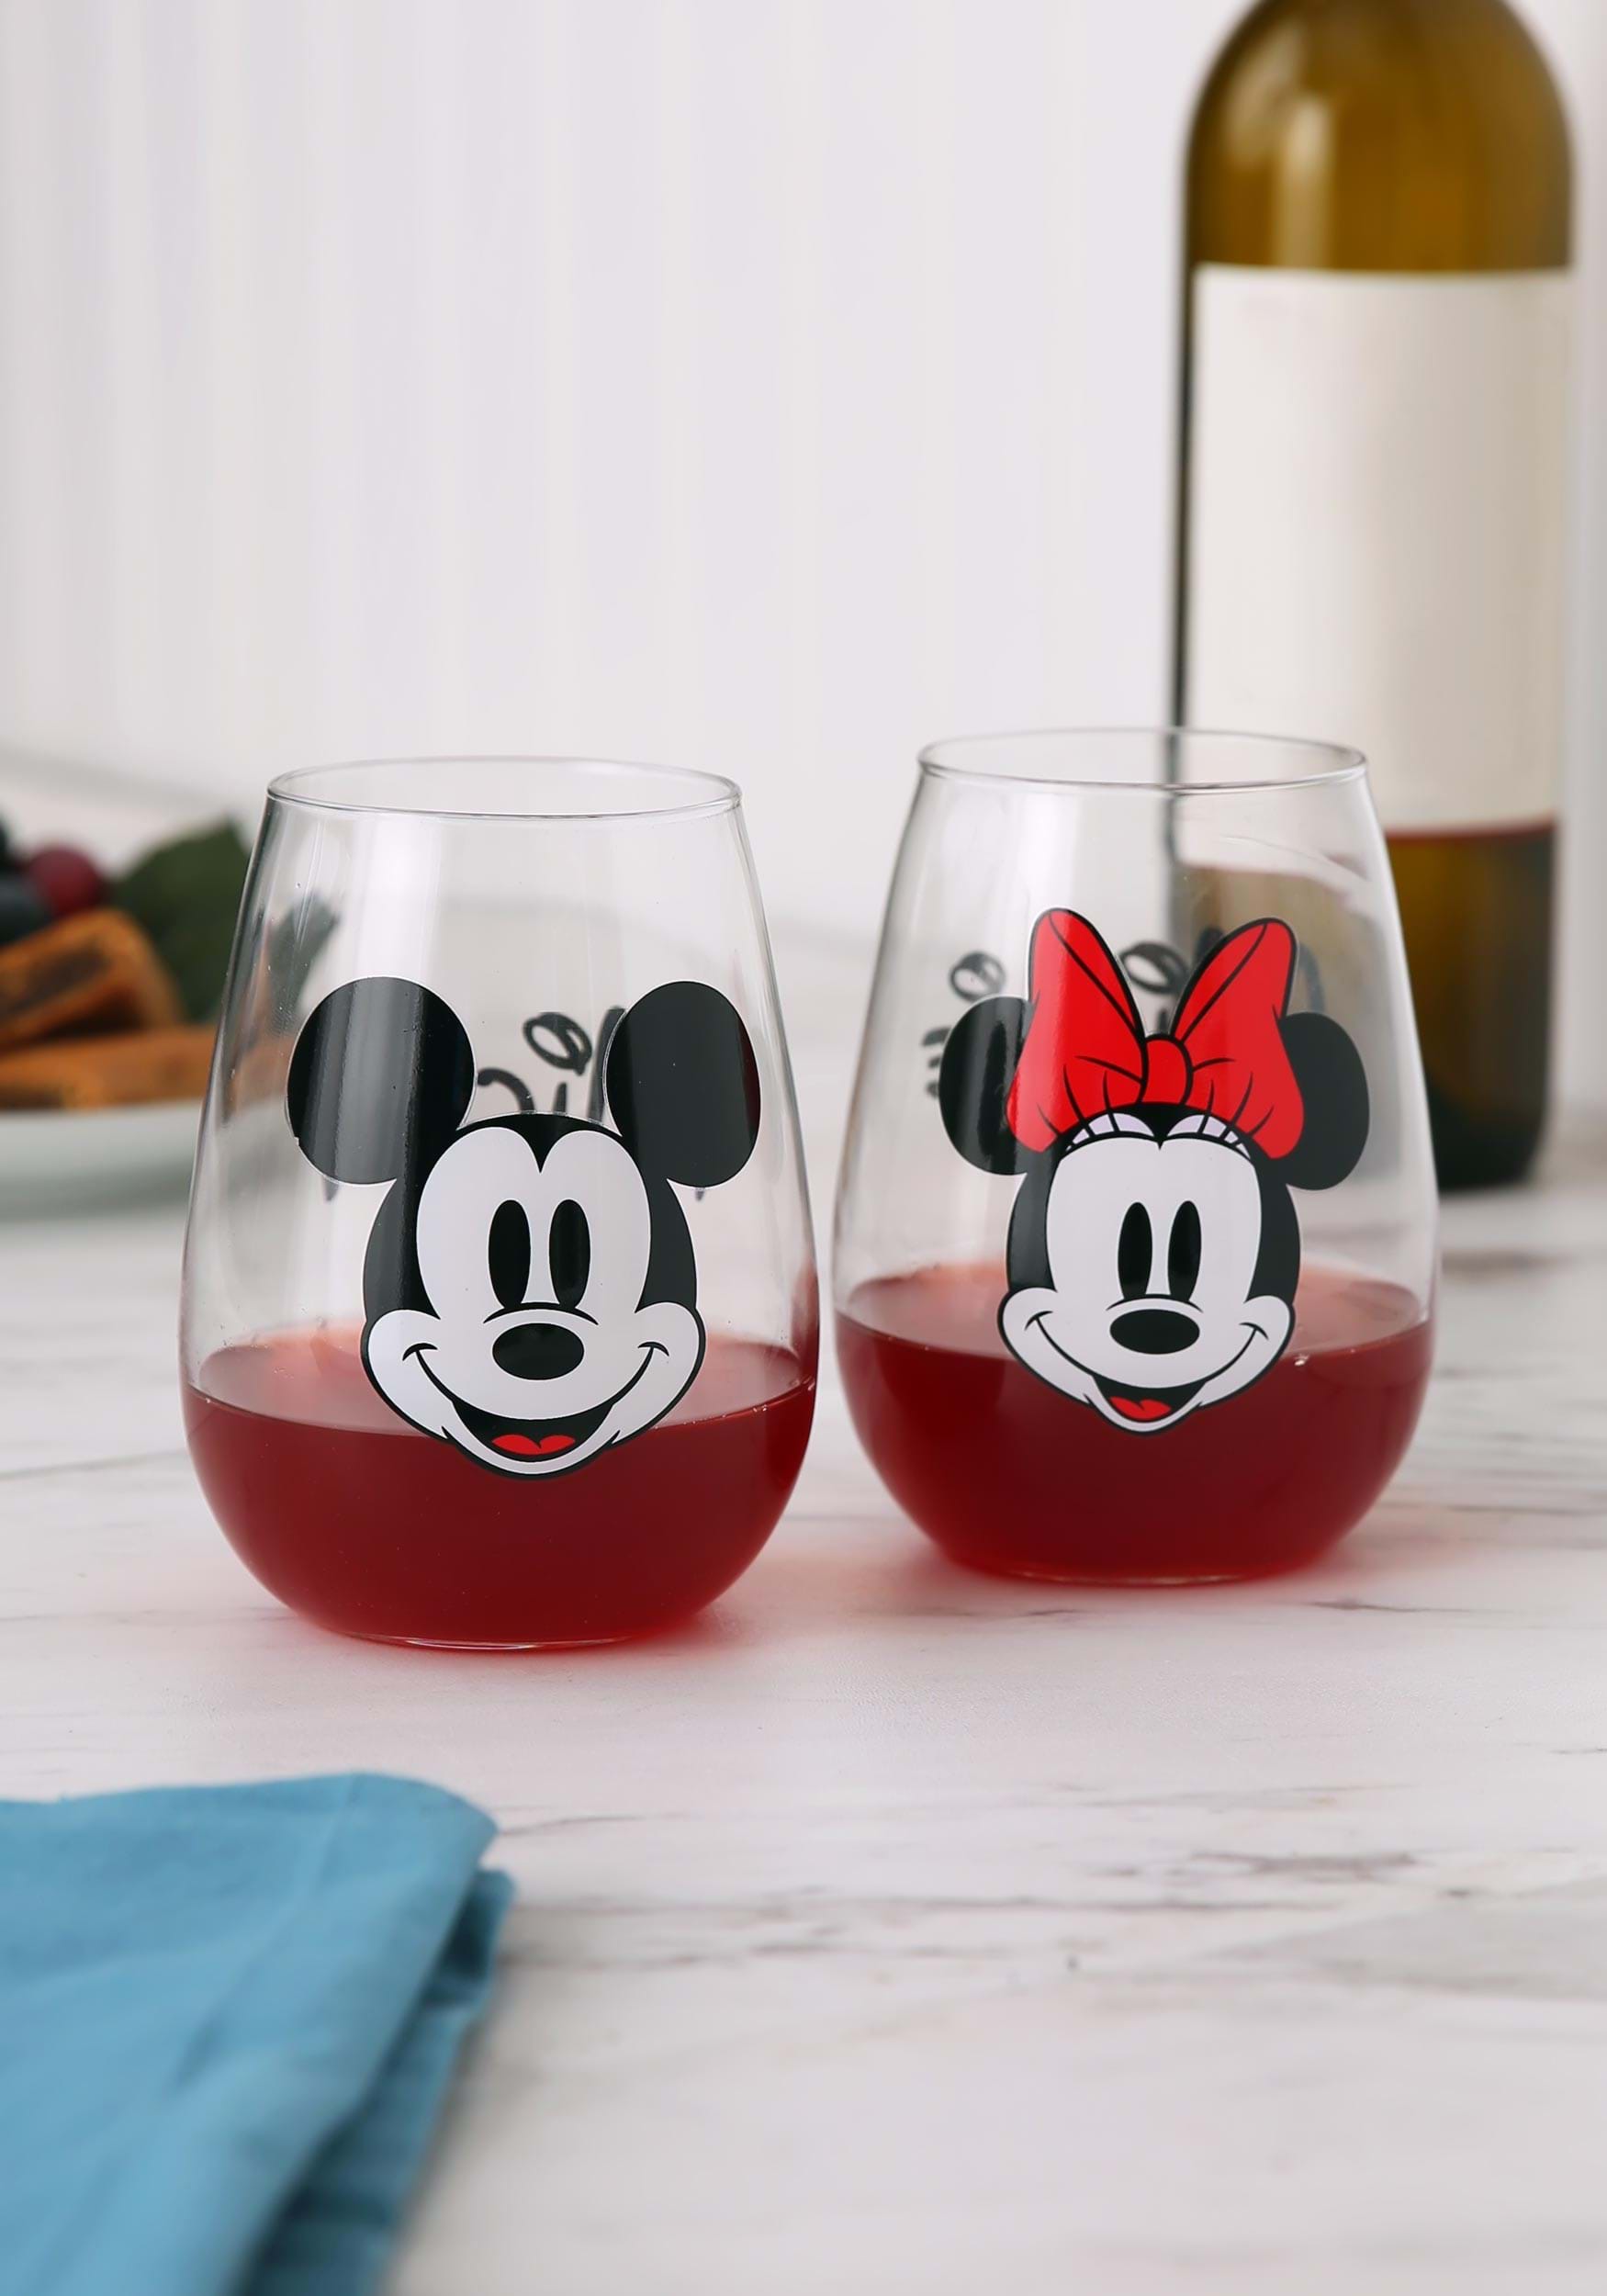 https://images.fun.com/products/67846/1-1/disney-mickey-minnie-mouse-18-oz-contour-glasse-update.jpg